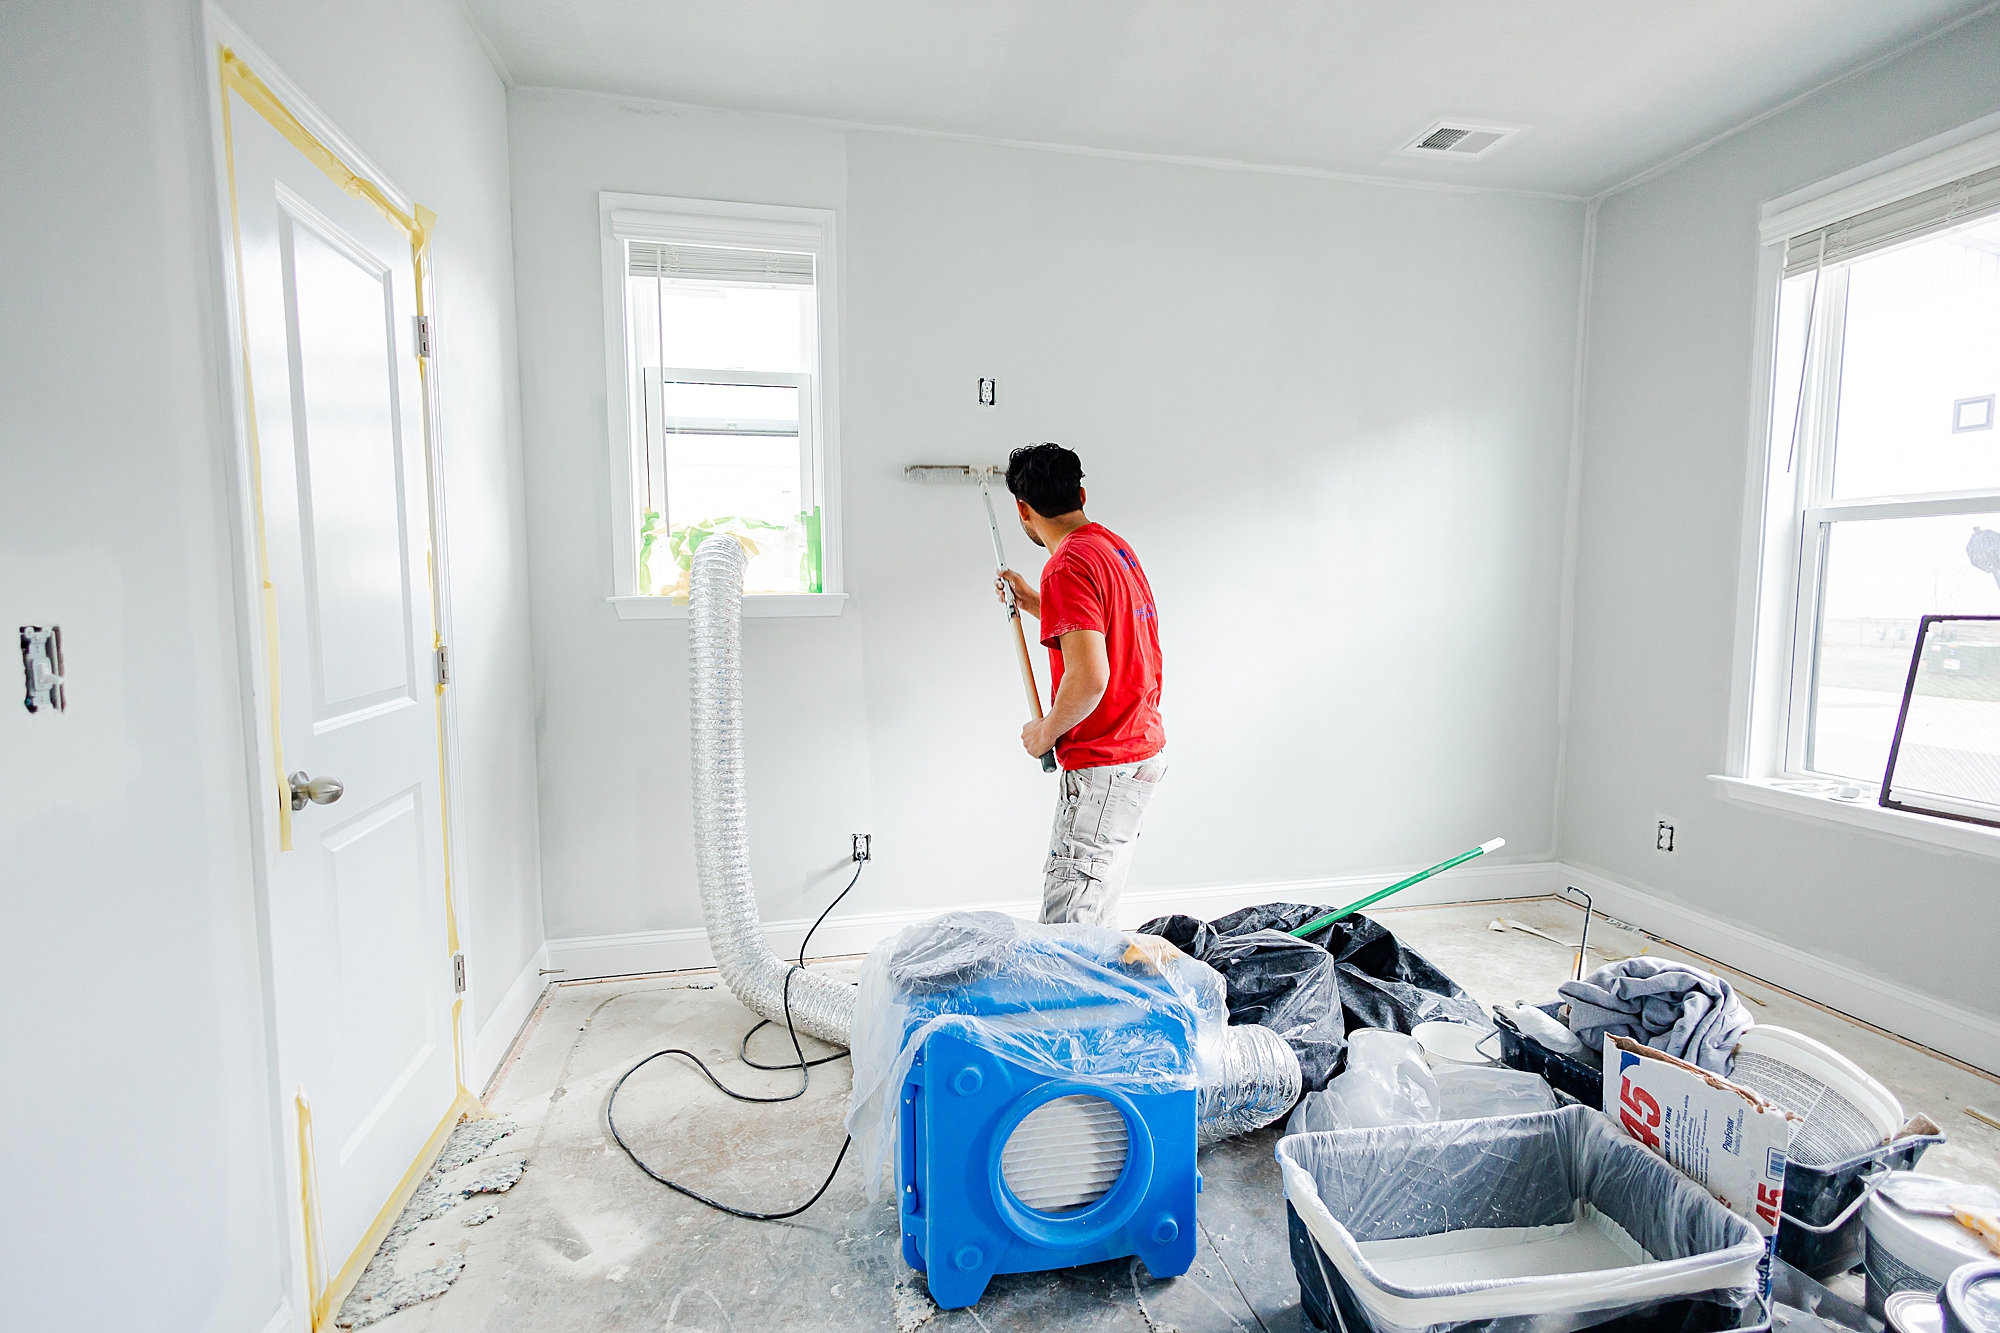 contractor paints walls during renovations with Turn Key Solutions for home photography studio 